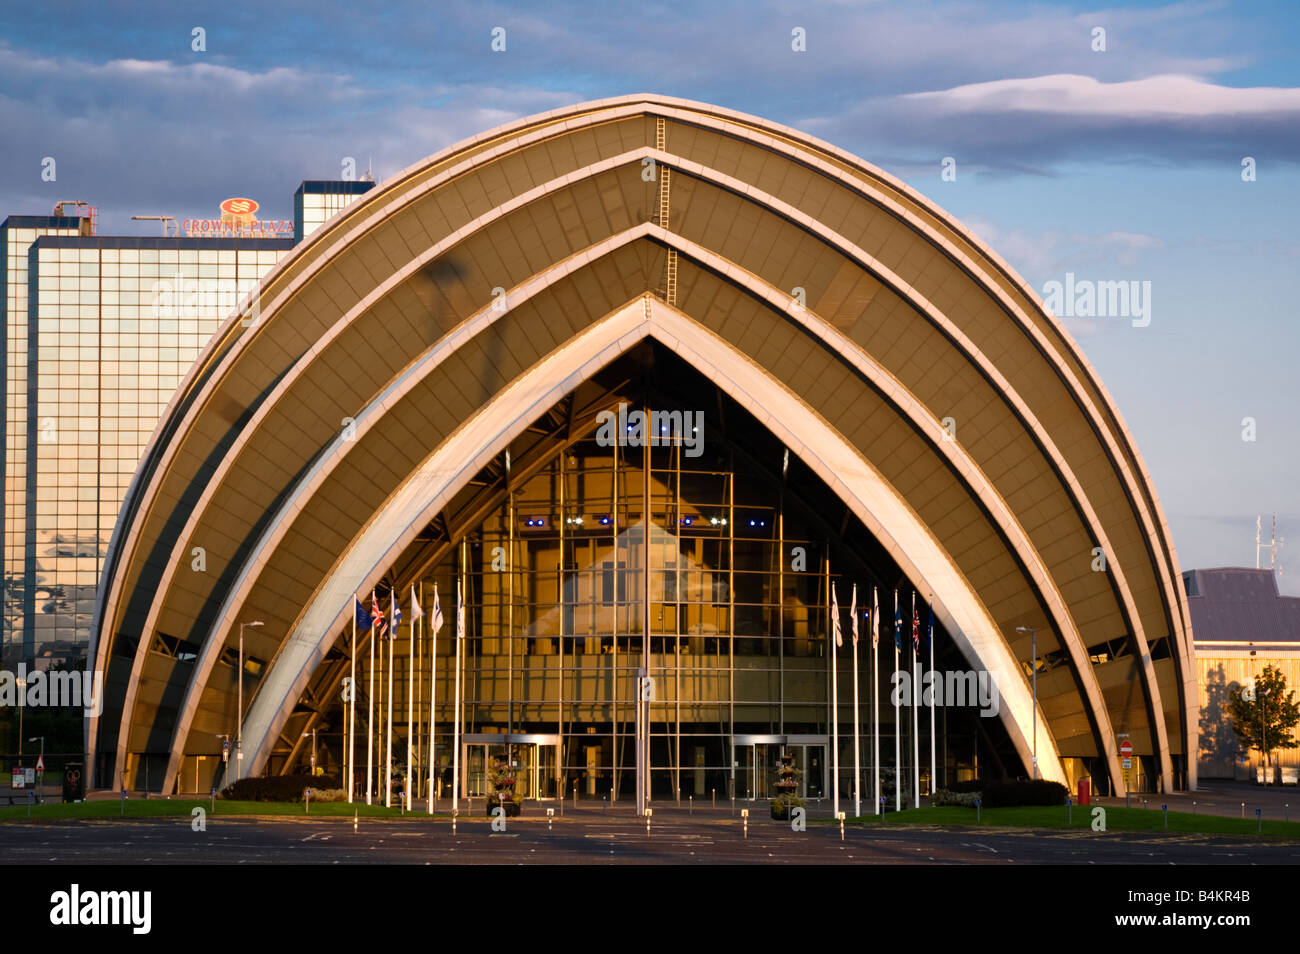 The Clyde auditorium locally known as the Armadillo and Crowne Plaza Hotel at sunrise, Glasgow, Scotland. Stock Photo